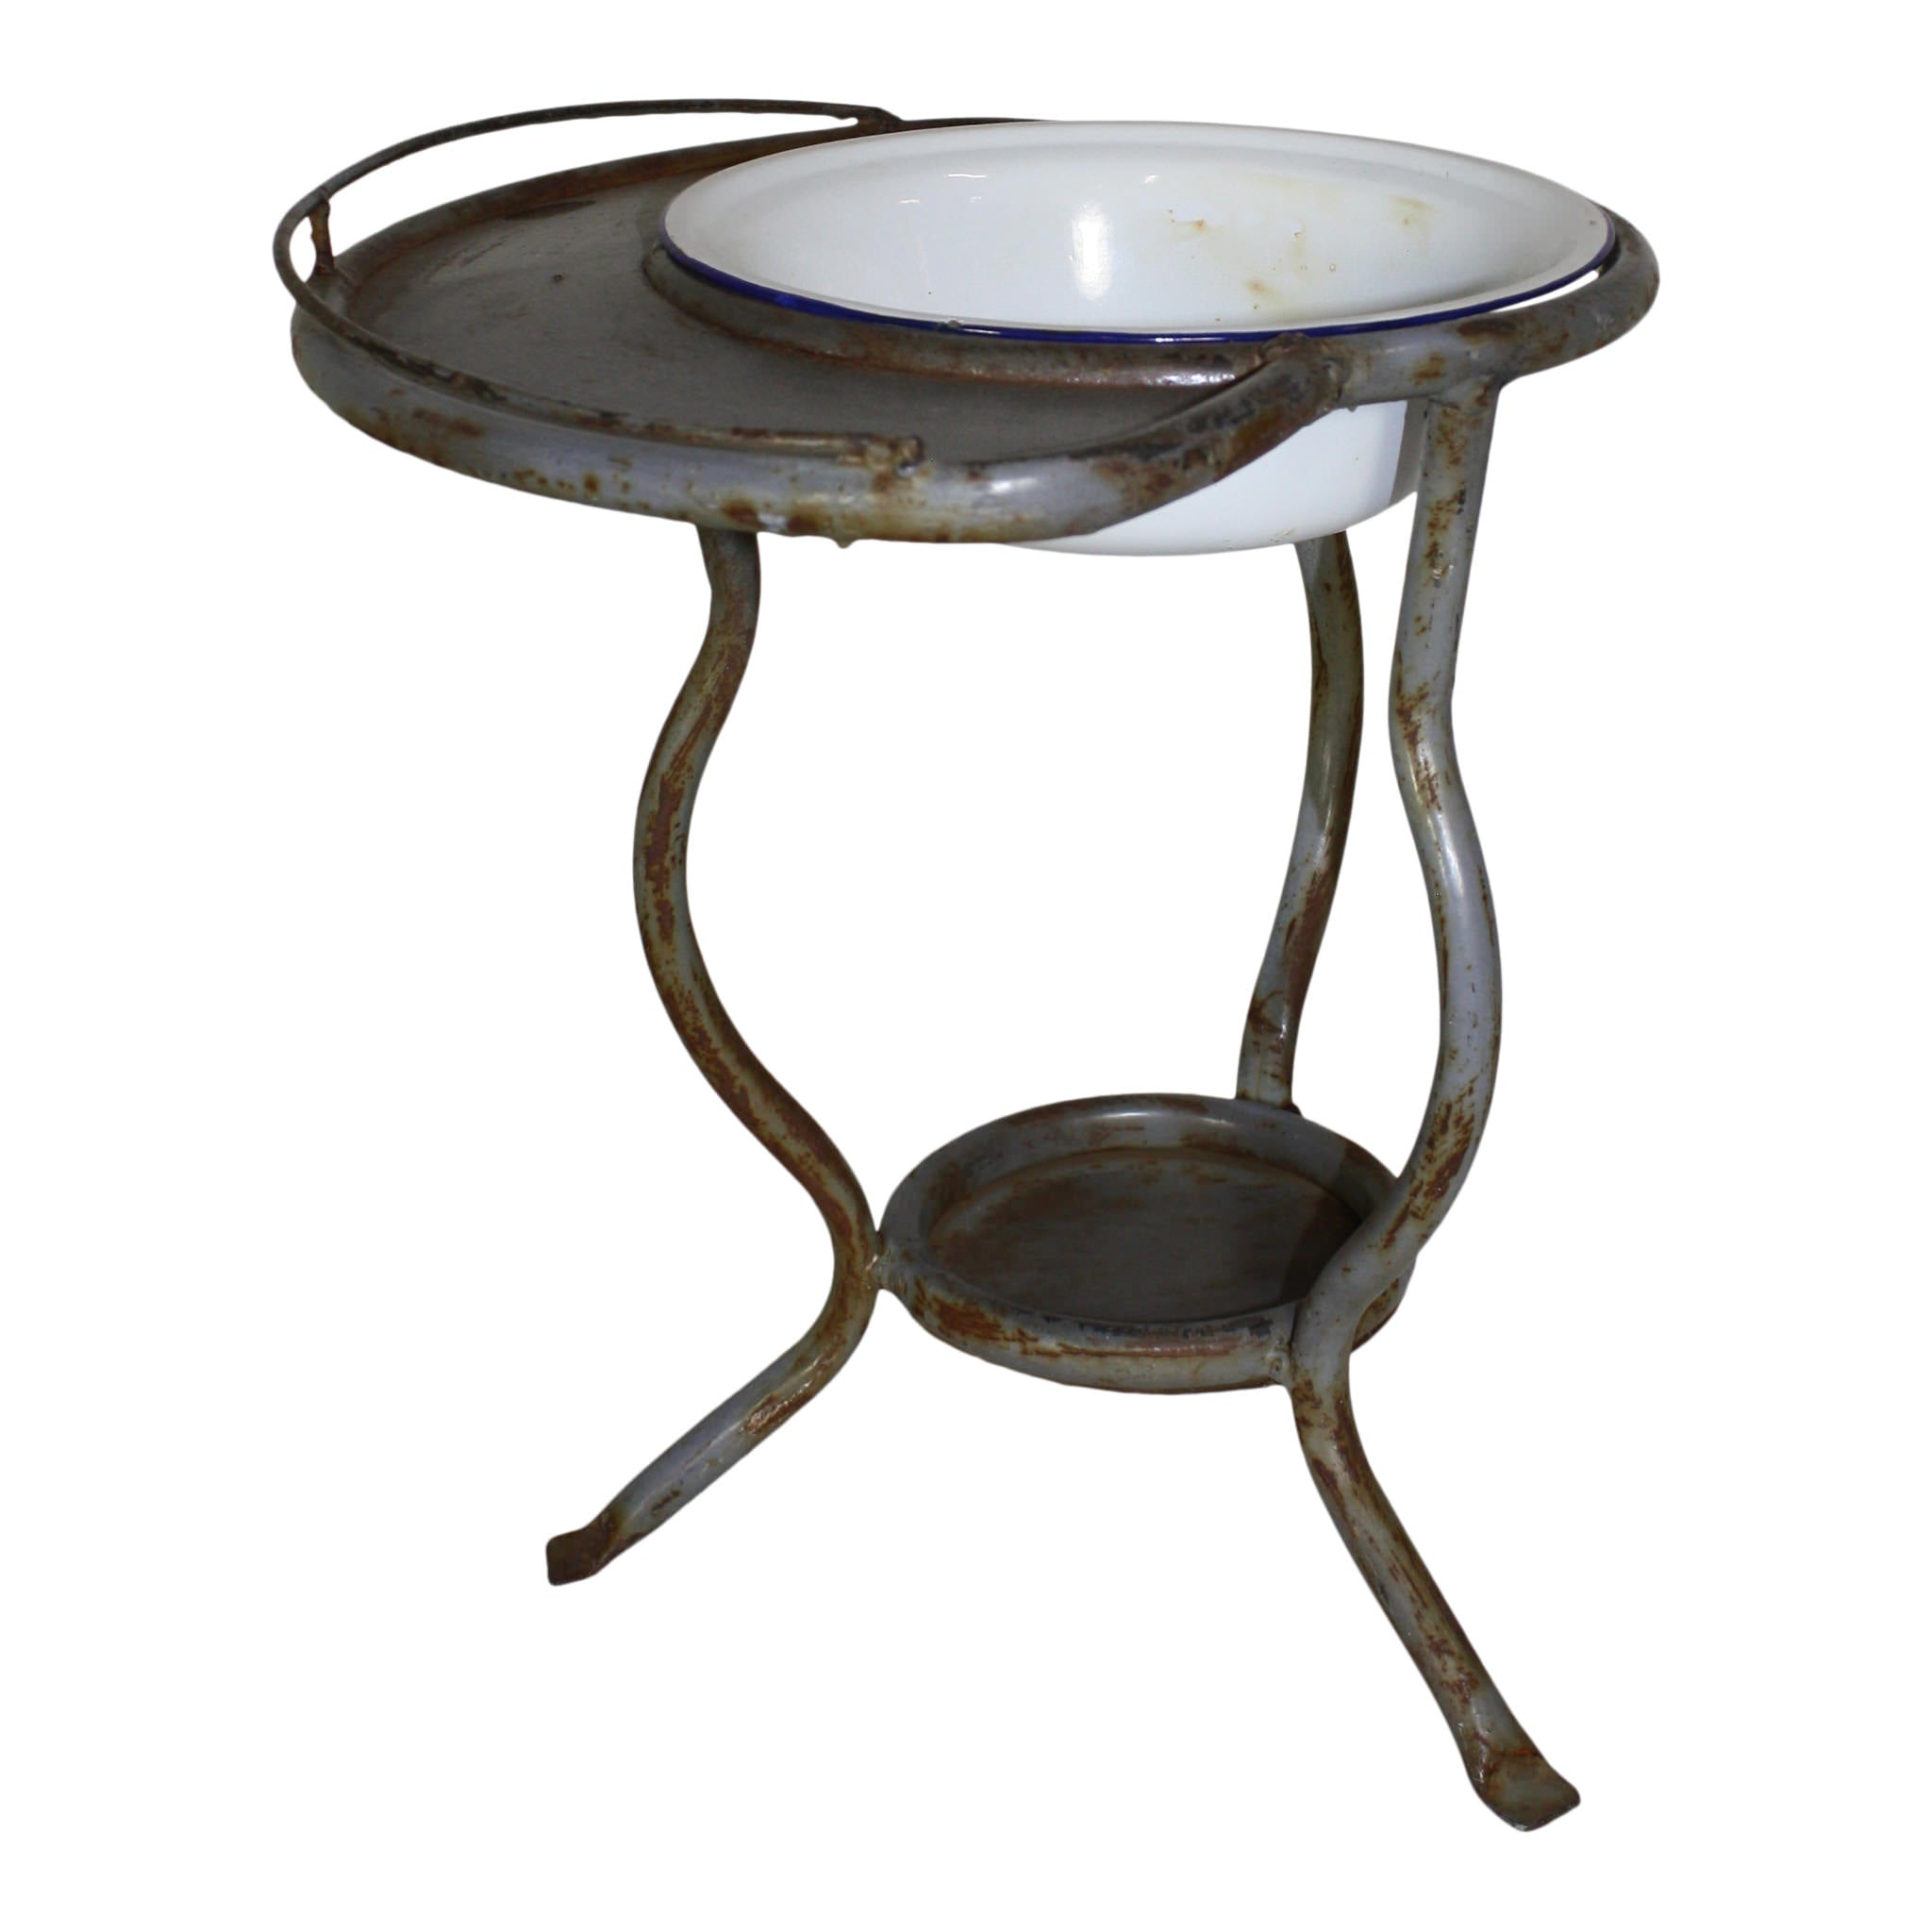 Child's Wash Stand with Basin